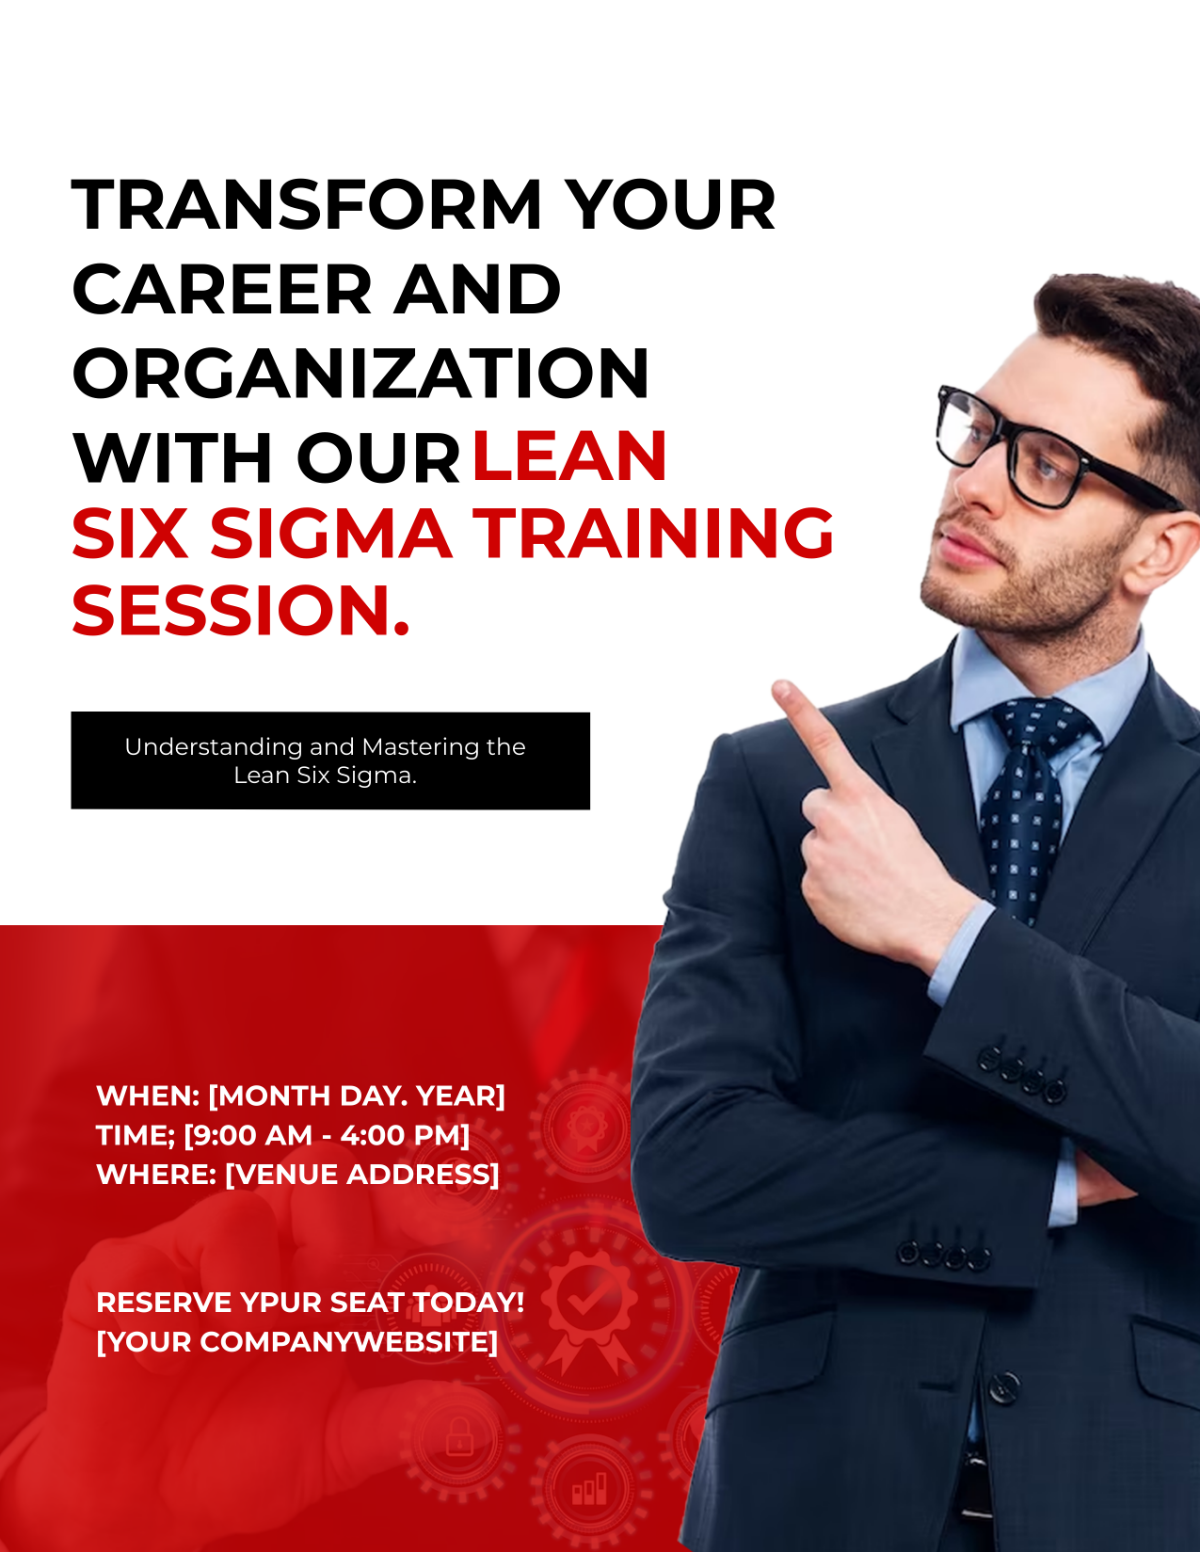 Lean Six Sigma Training Session Flyer Template